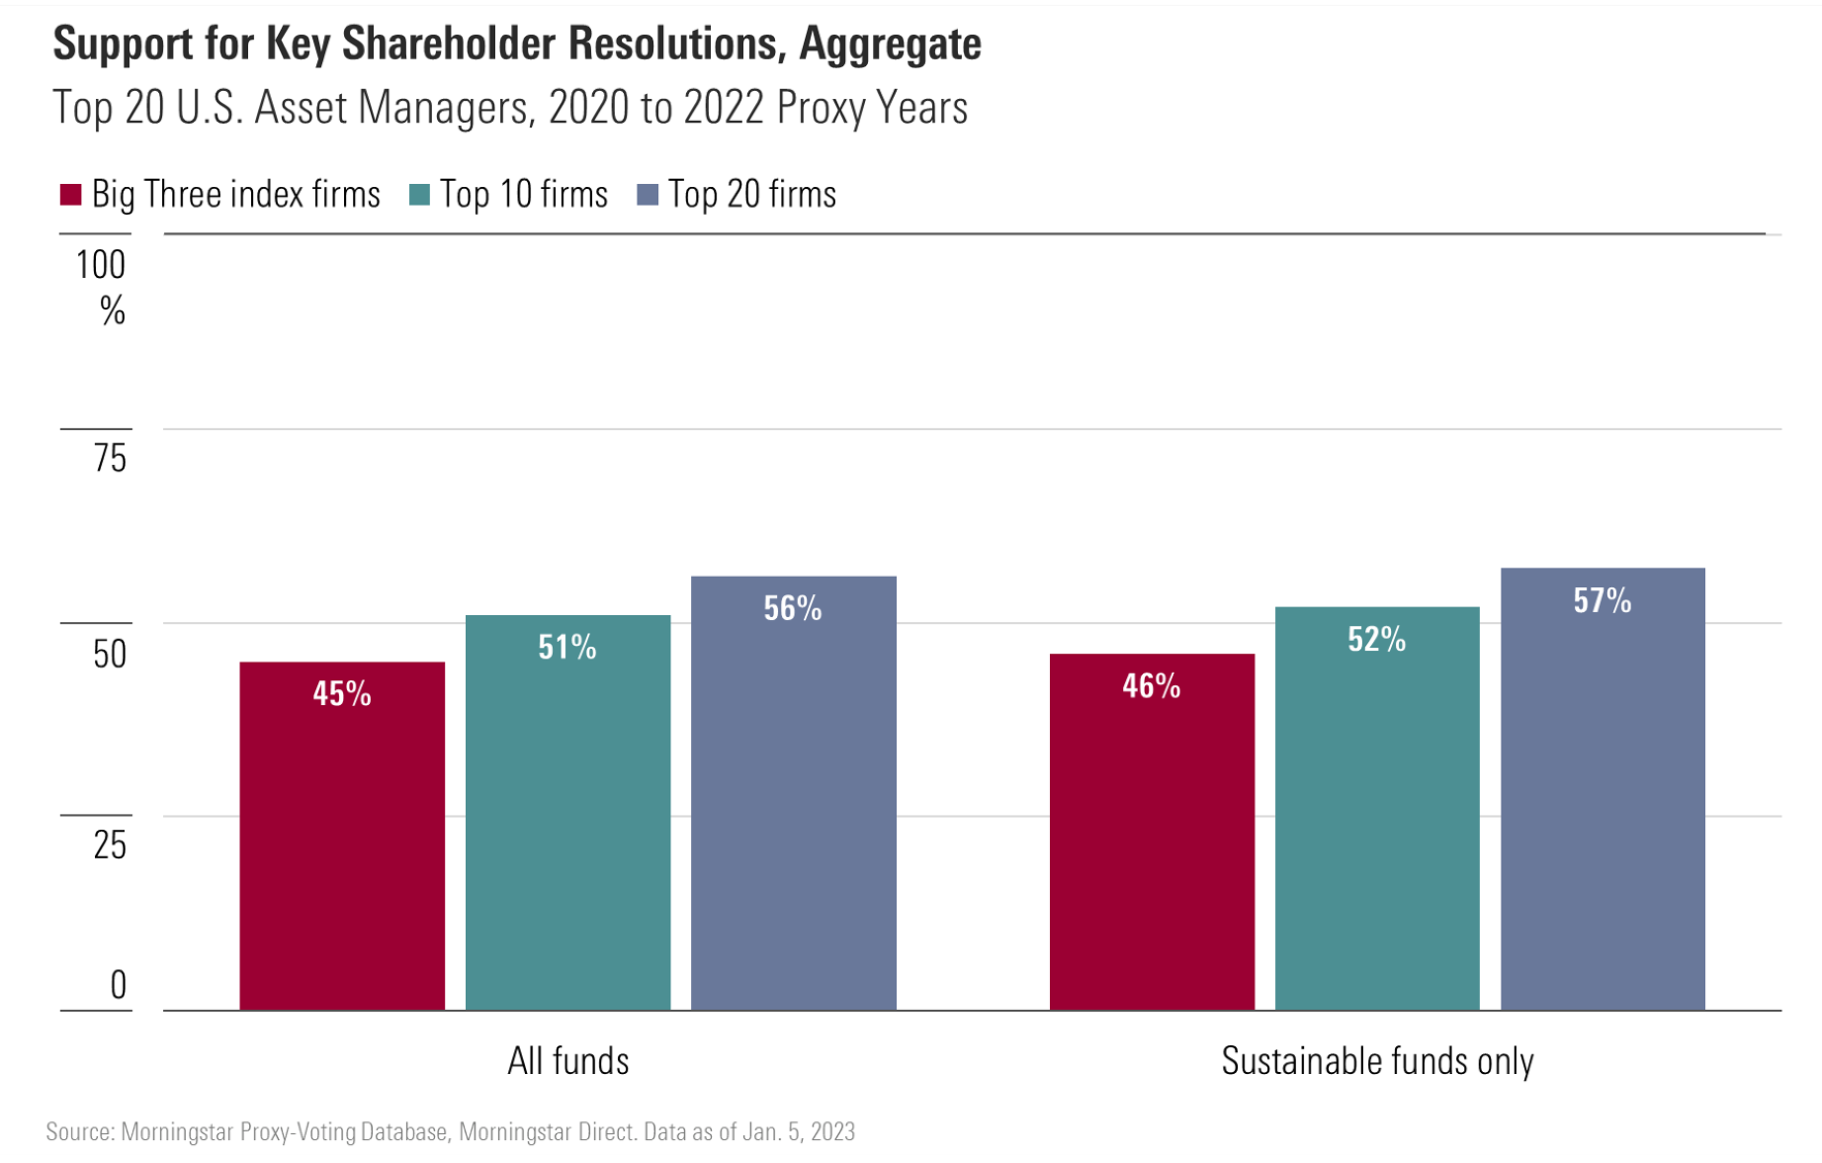 Bar chart showing that most of the top 20 U.S. asset managers voted around half their fund votes on 241 key ESG resolutions in support of them, both in the whole fund range and for sustainable funds only.